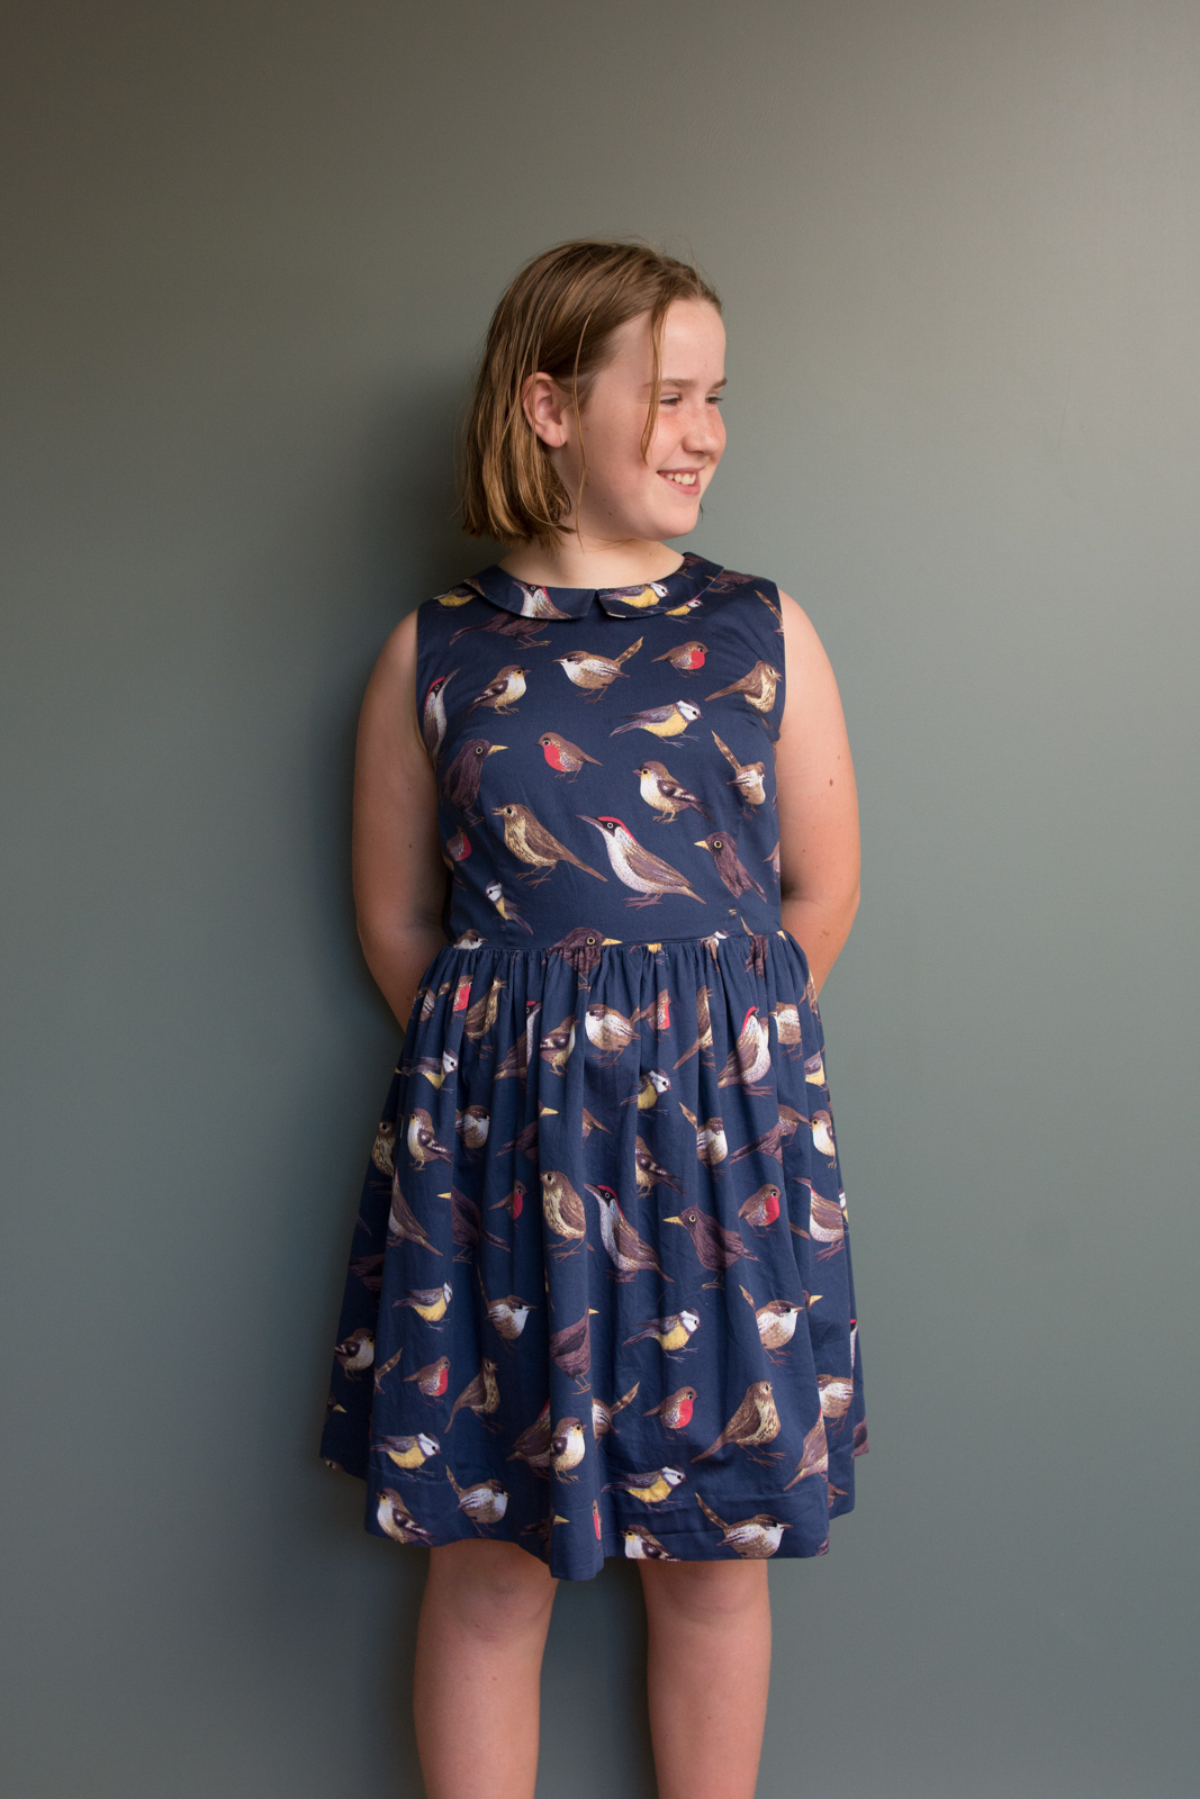 The Building Block Dress book + the Bistro Dress = an adult-sized Fairy Tale Dress.